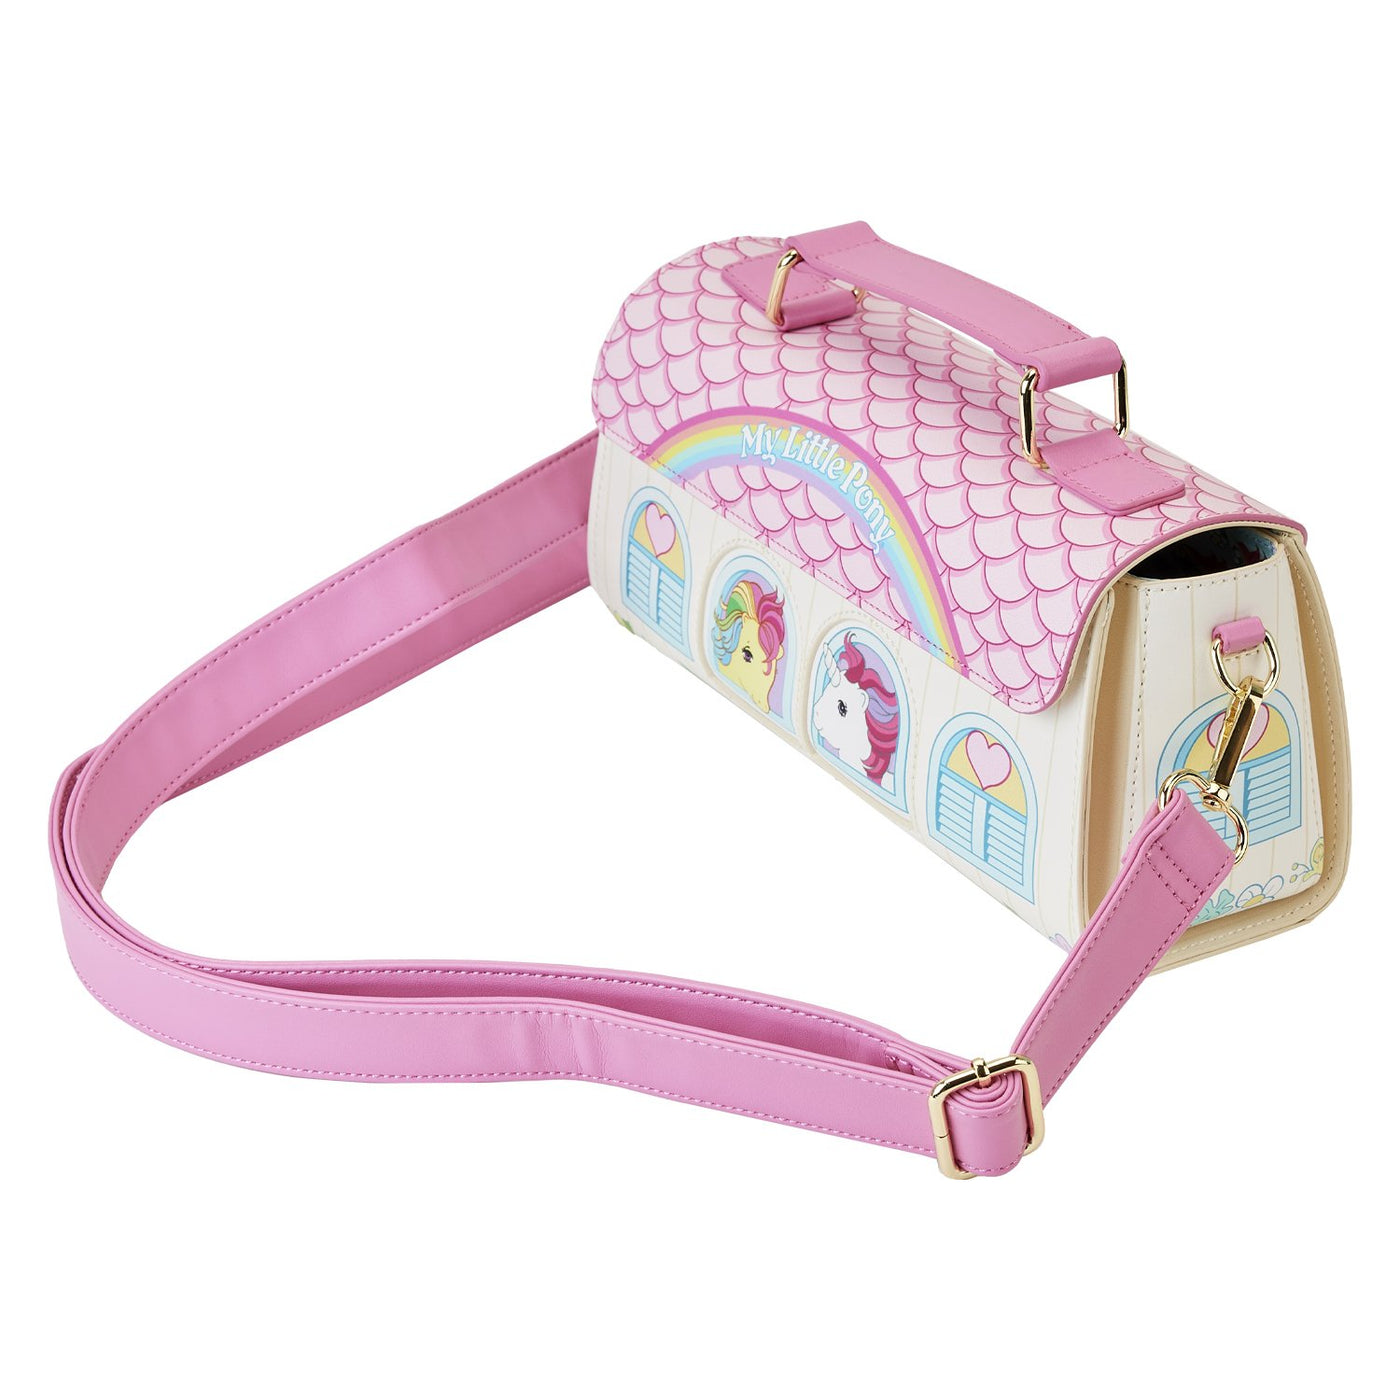 671803456273 - Loungefly Hasbro My Little Pony 40th Anniversary Stable Crossbody - Top View